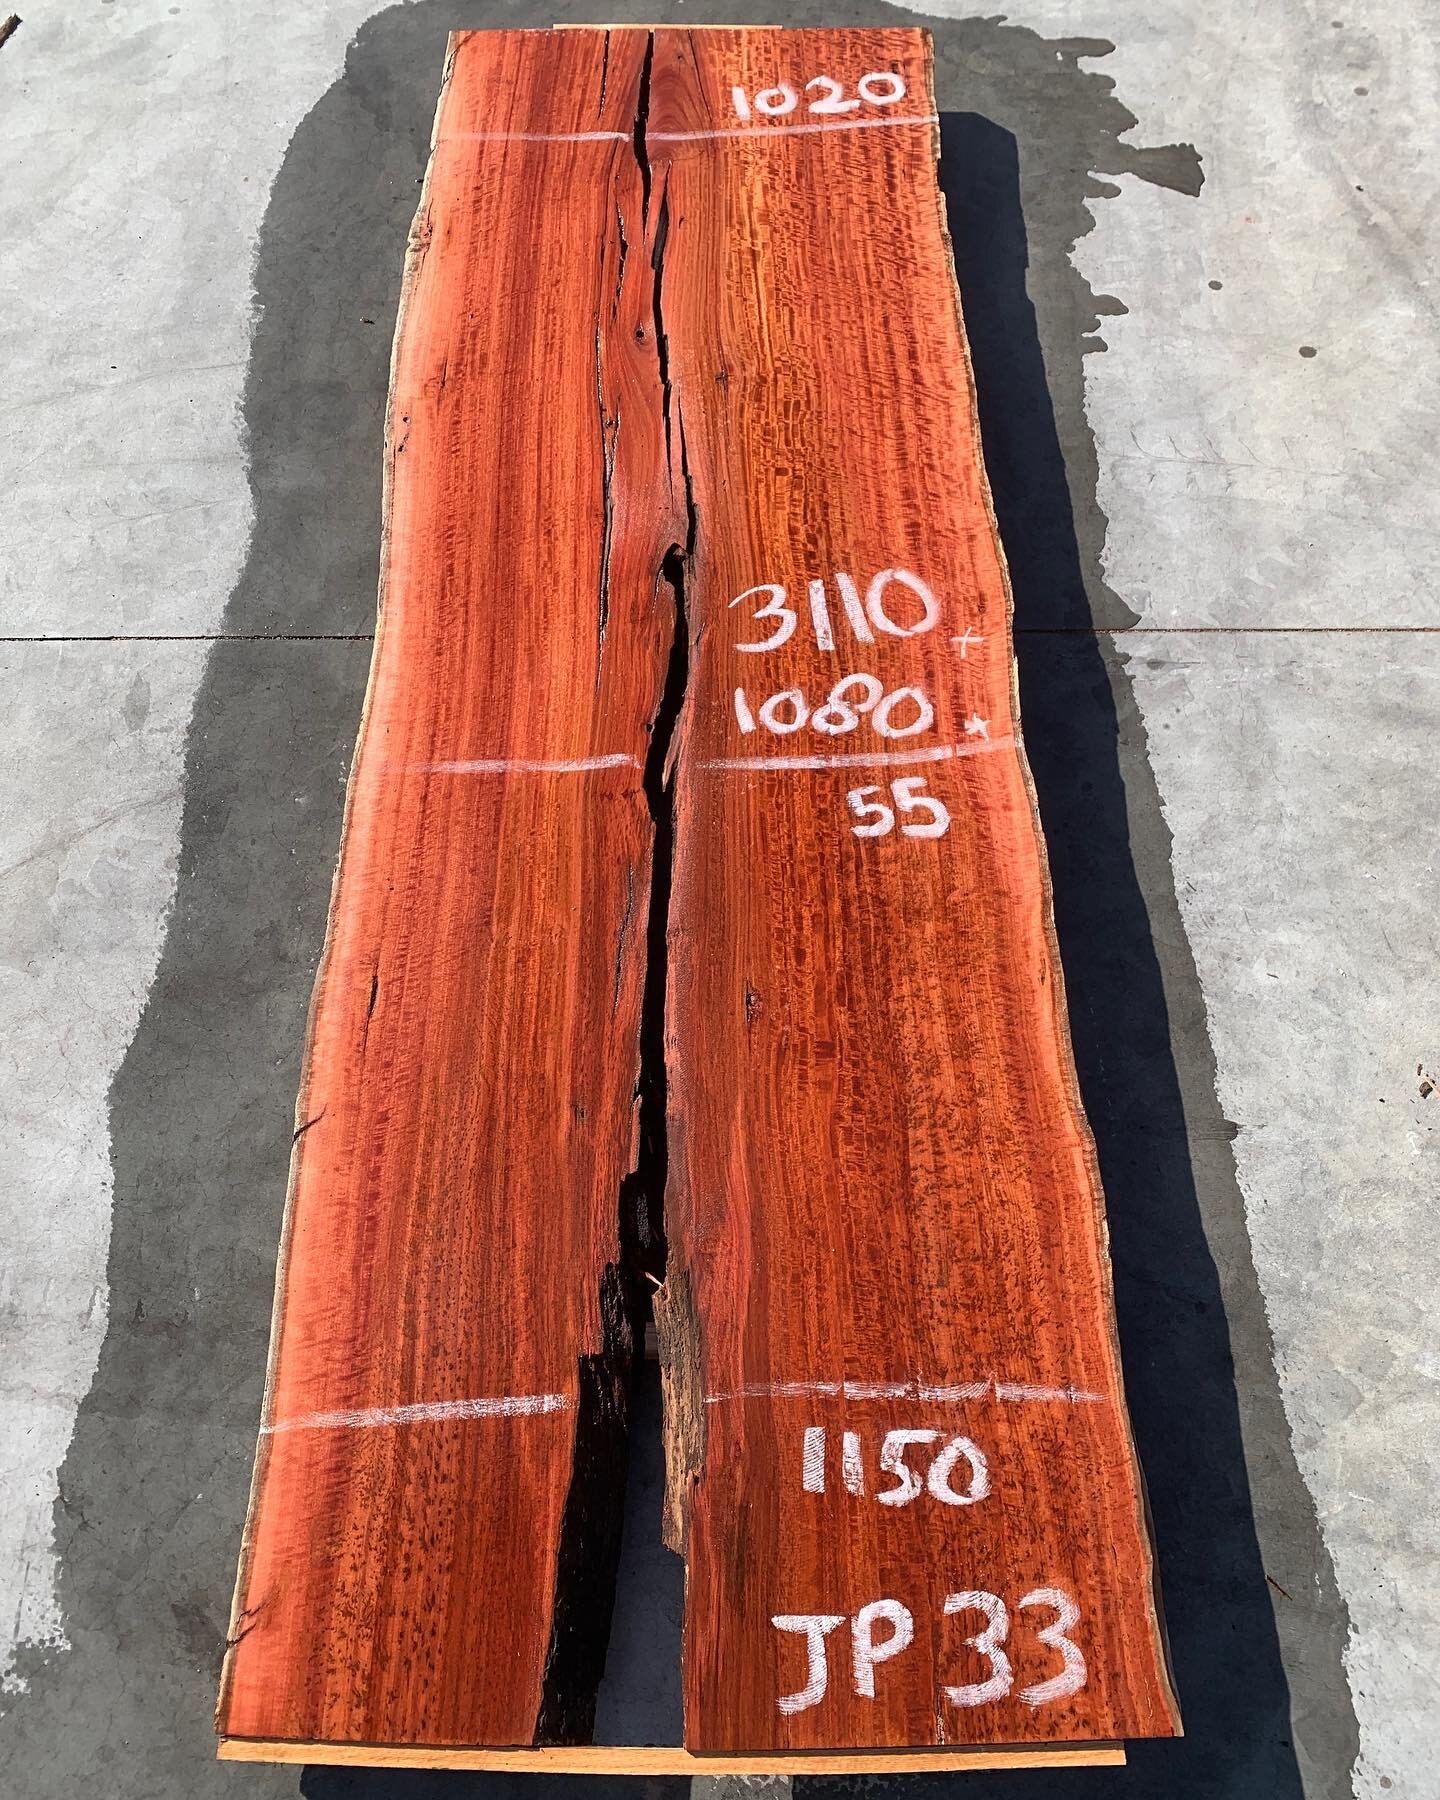 Curly Jarrah goodness. Beautiful slab primed for a dining or boardroom statement piece! Get in quick. 

1080 x 3110 x 55, $990